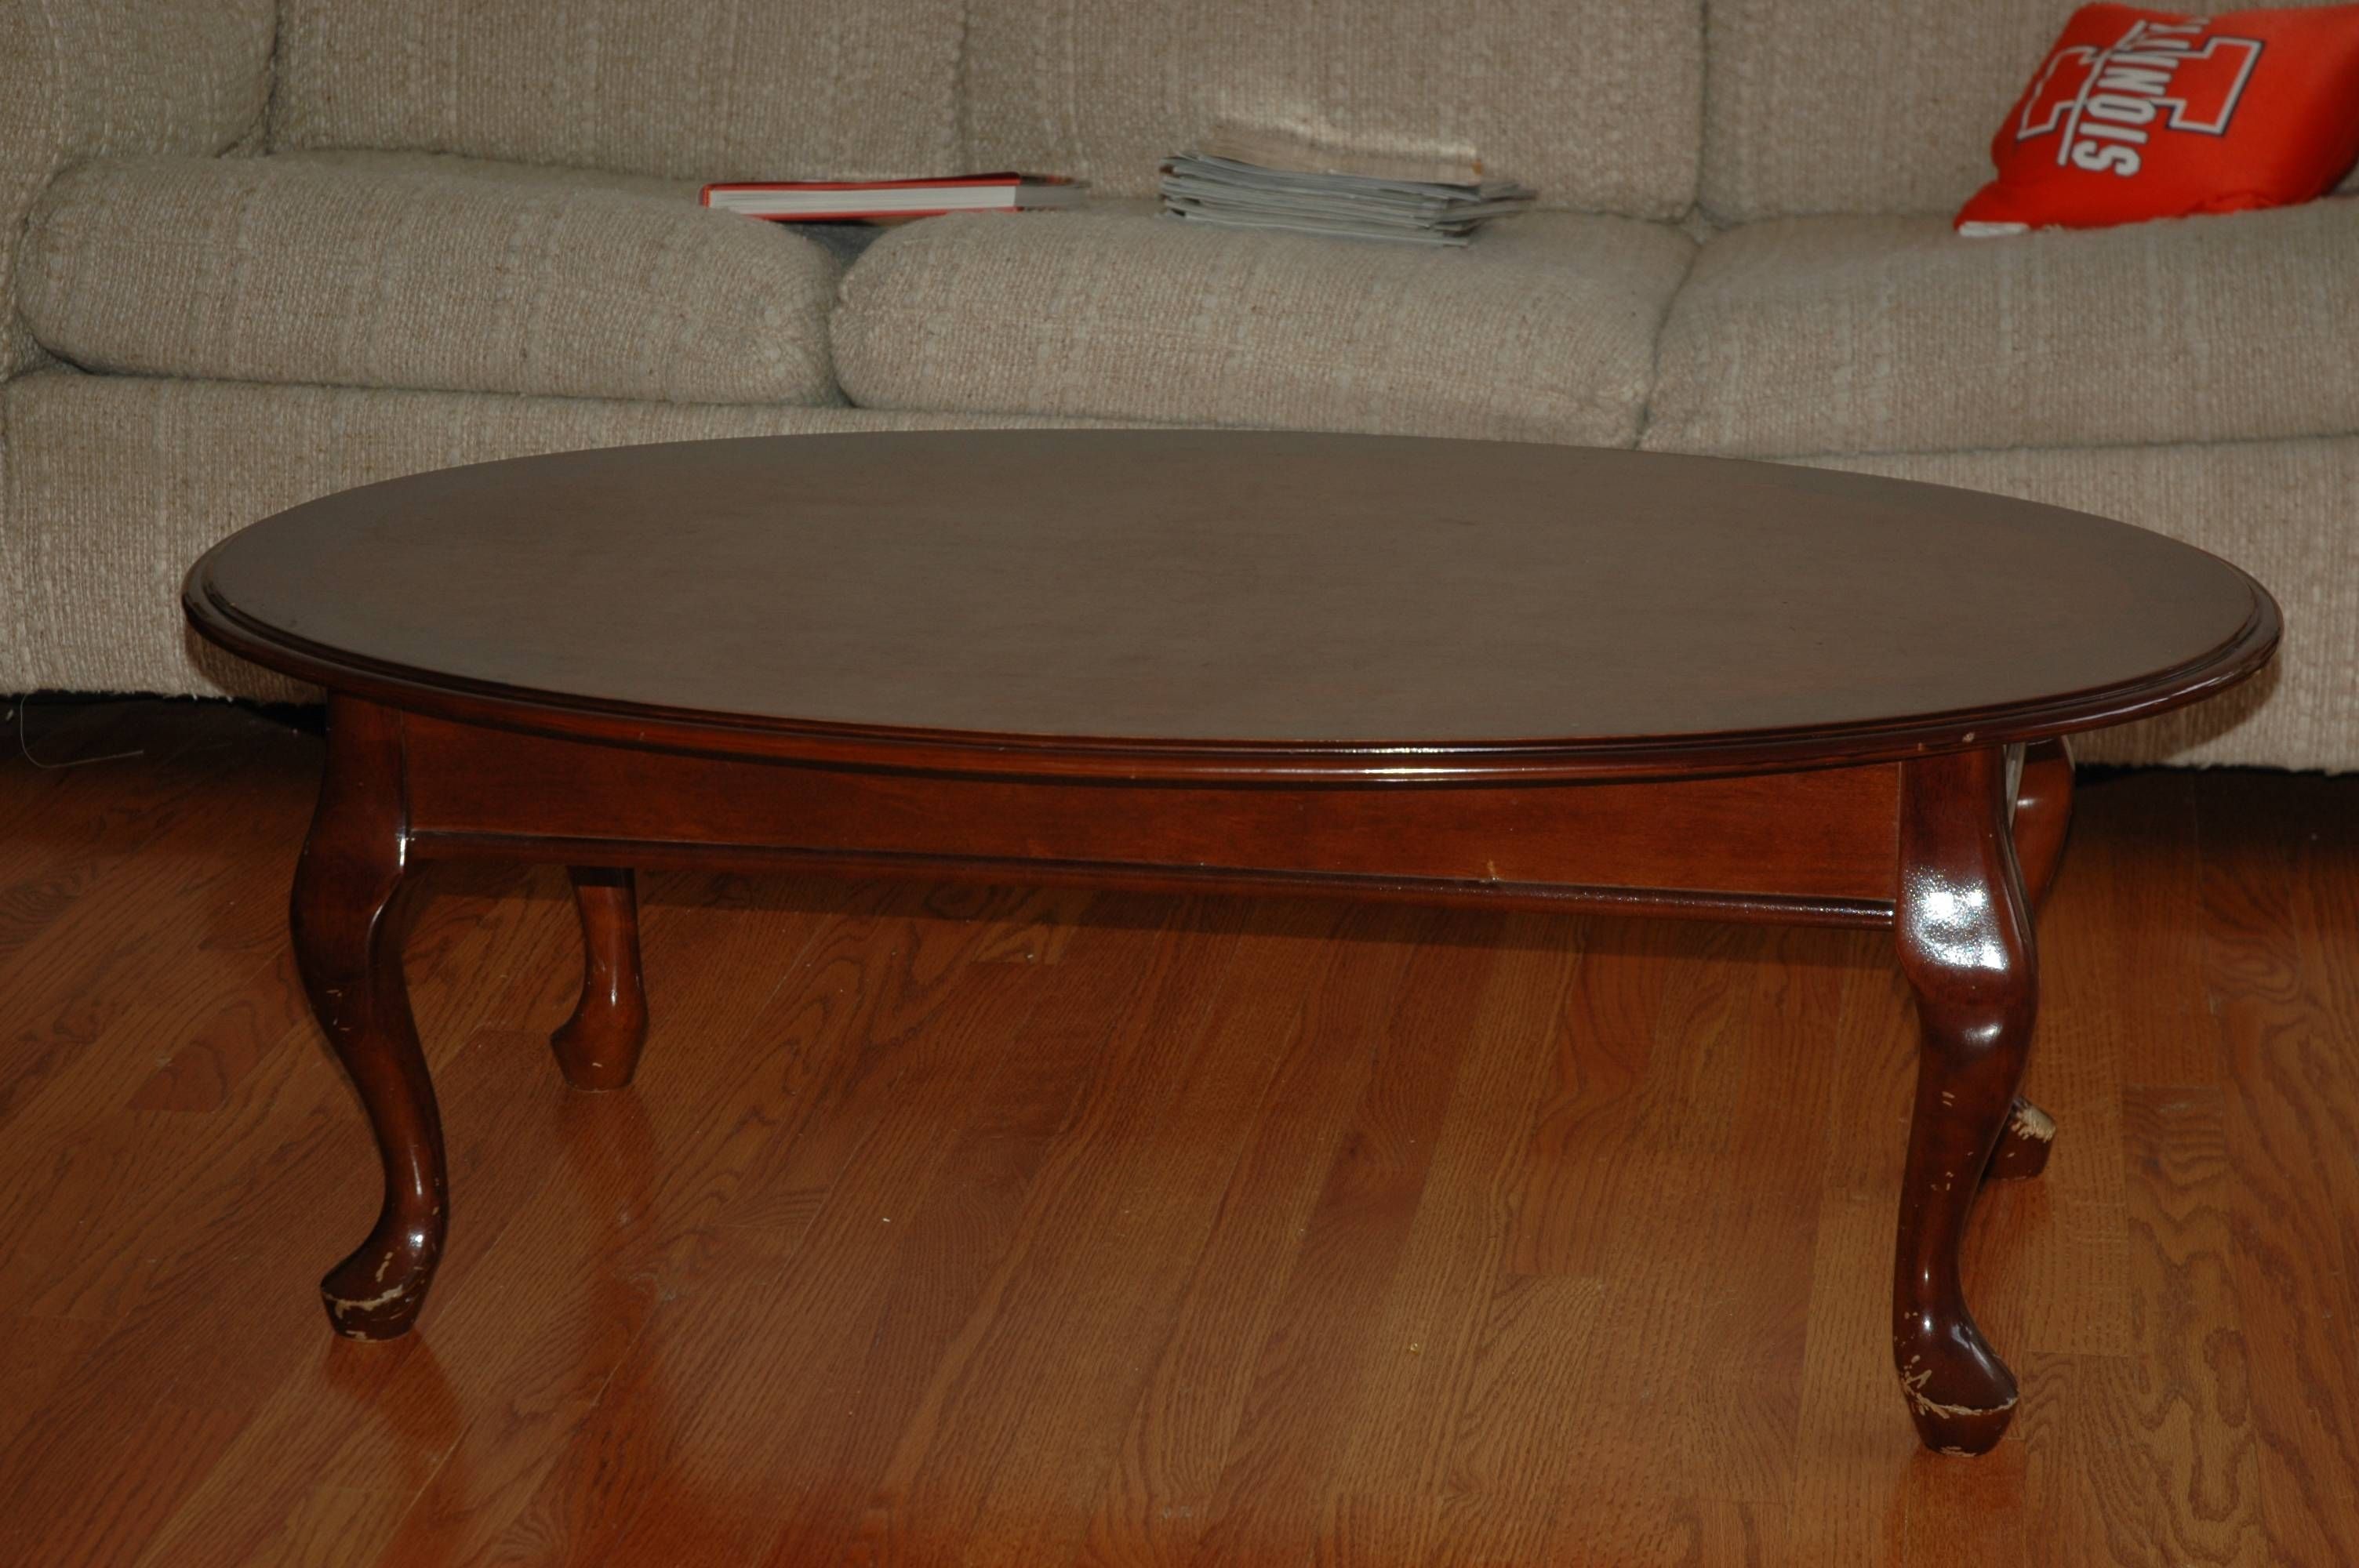 Small Round Cherry Coffee Table | Coffee Tables Decoration Inside Black Oval Coffee Tables (View 17 of 30)